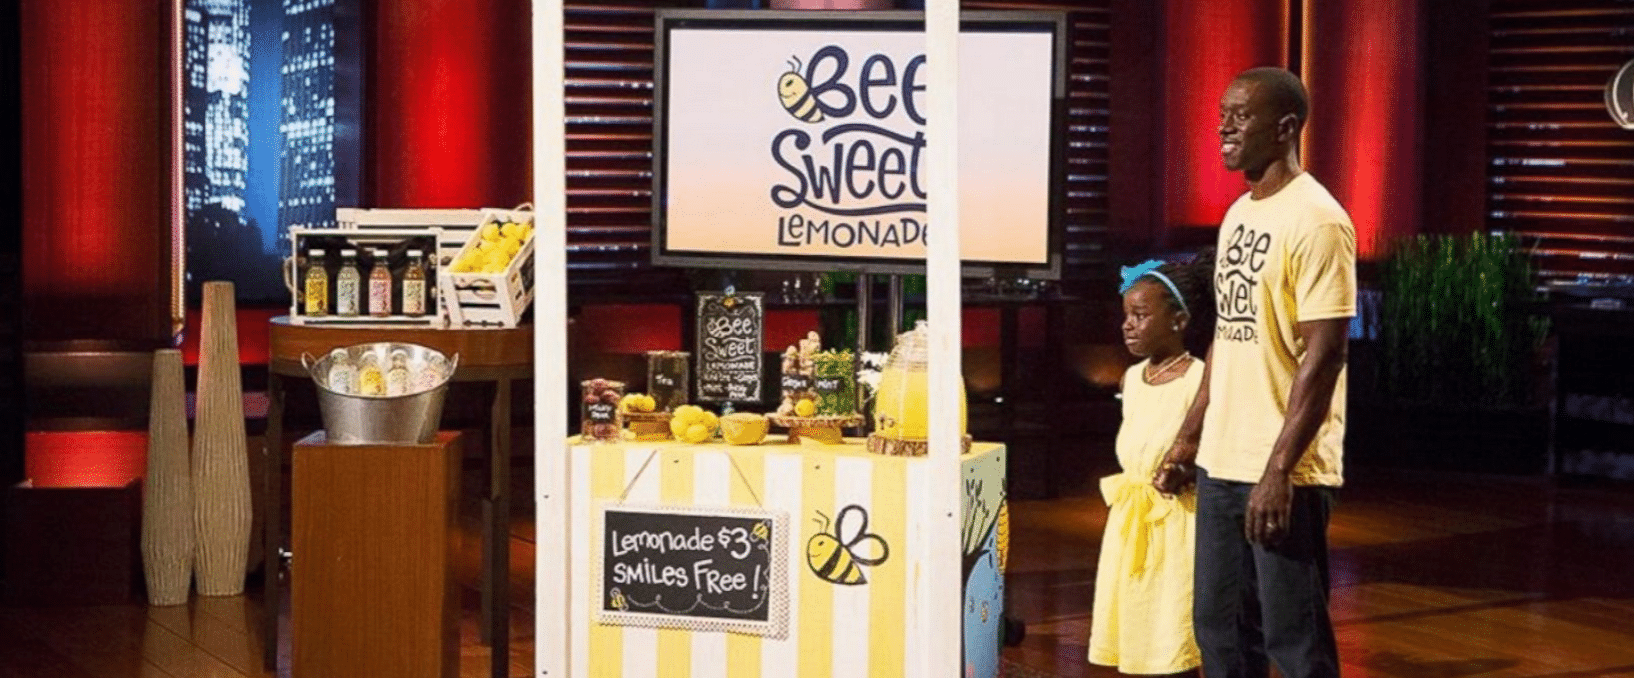 Mikaila Ulmer and her father, Theo, on ABC's Shark Tank last year where they received a $60,000 investment from Shark Tank investor and FUBU CEO Daymond John 